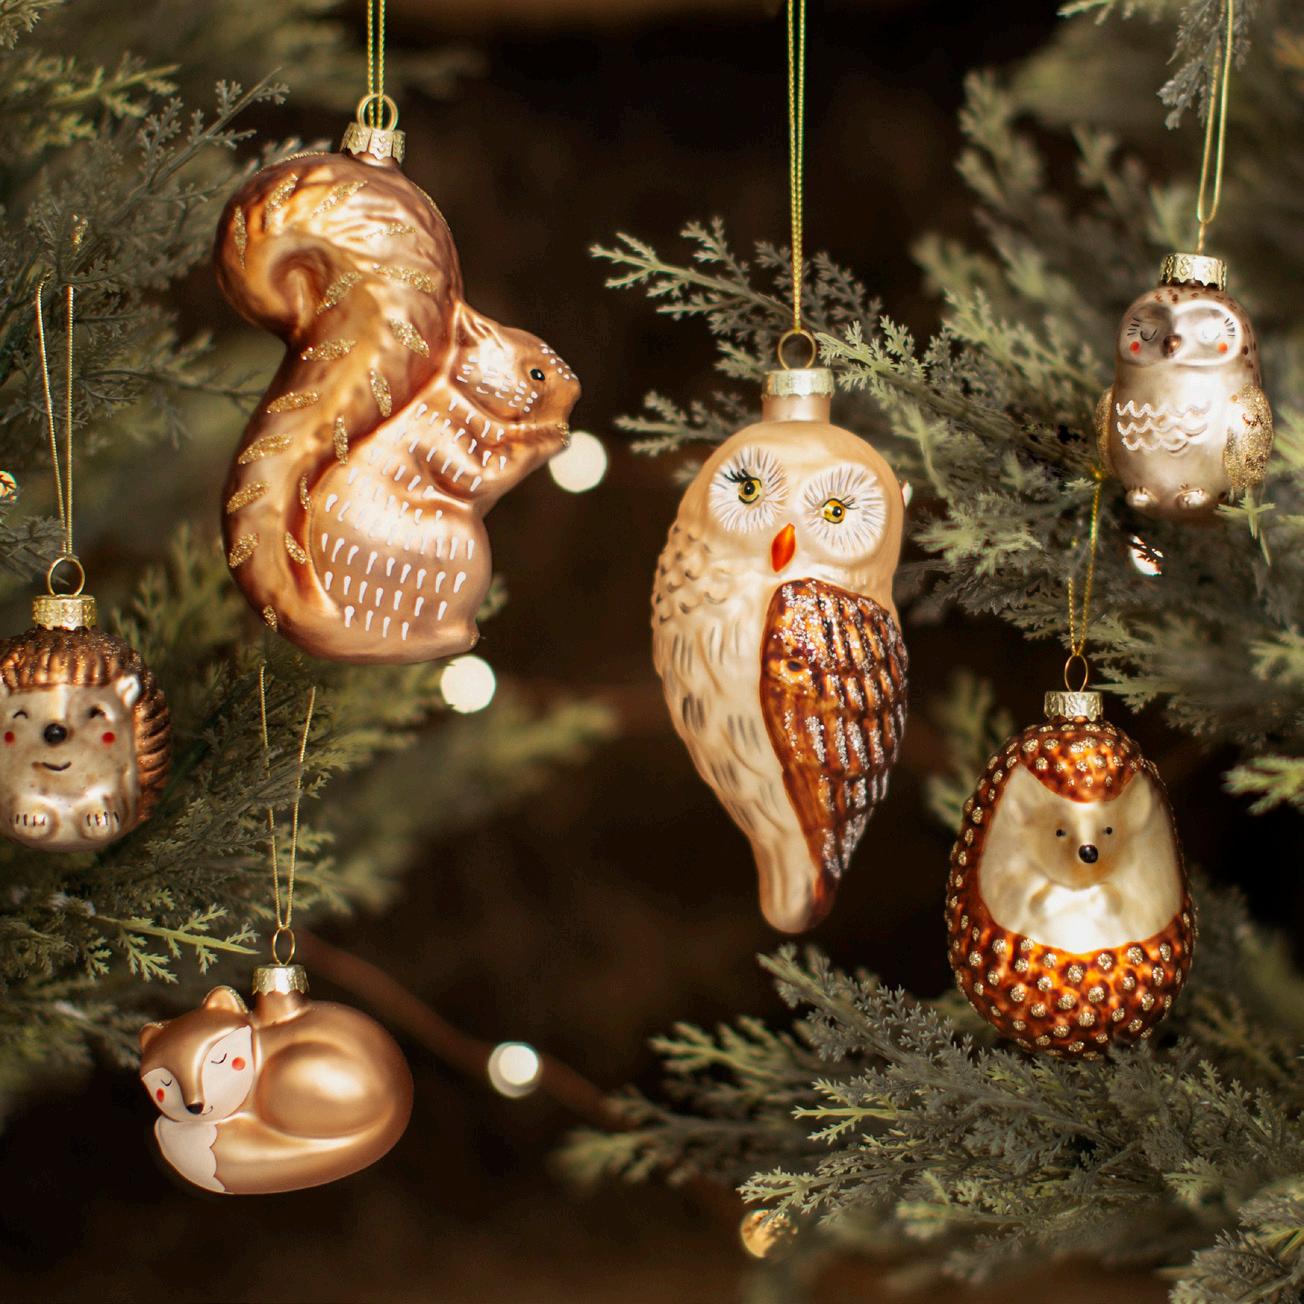 This very cute woodland hedgehog glass Christmas decoration will definitely melt some hearts this festive season! How about creating a magical woodland theme this year?